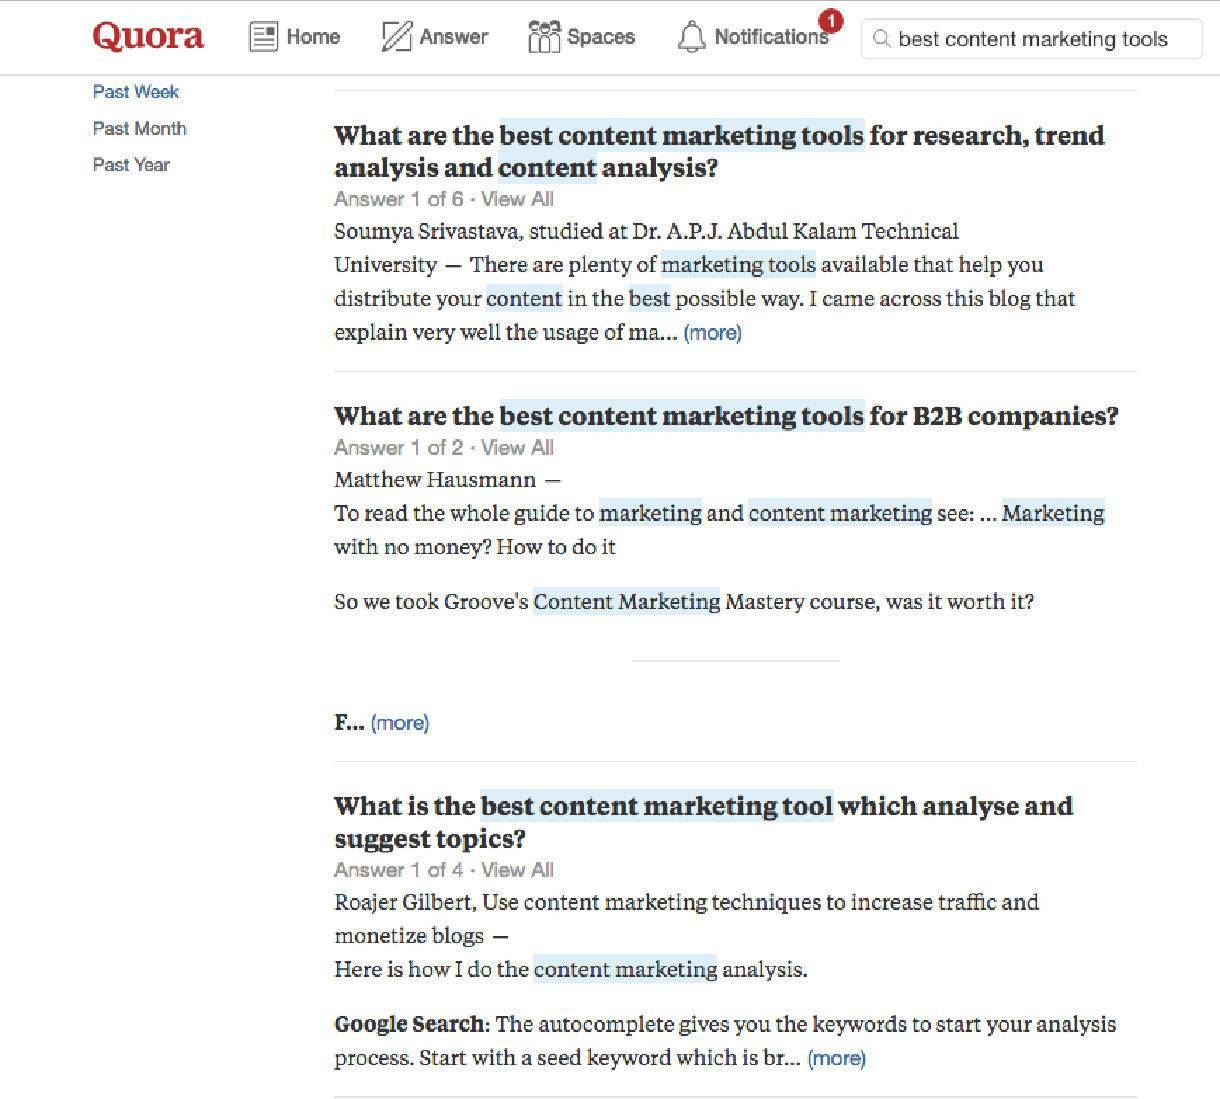 Quora search results for "best content marketing tools."